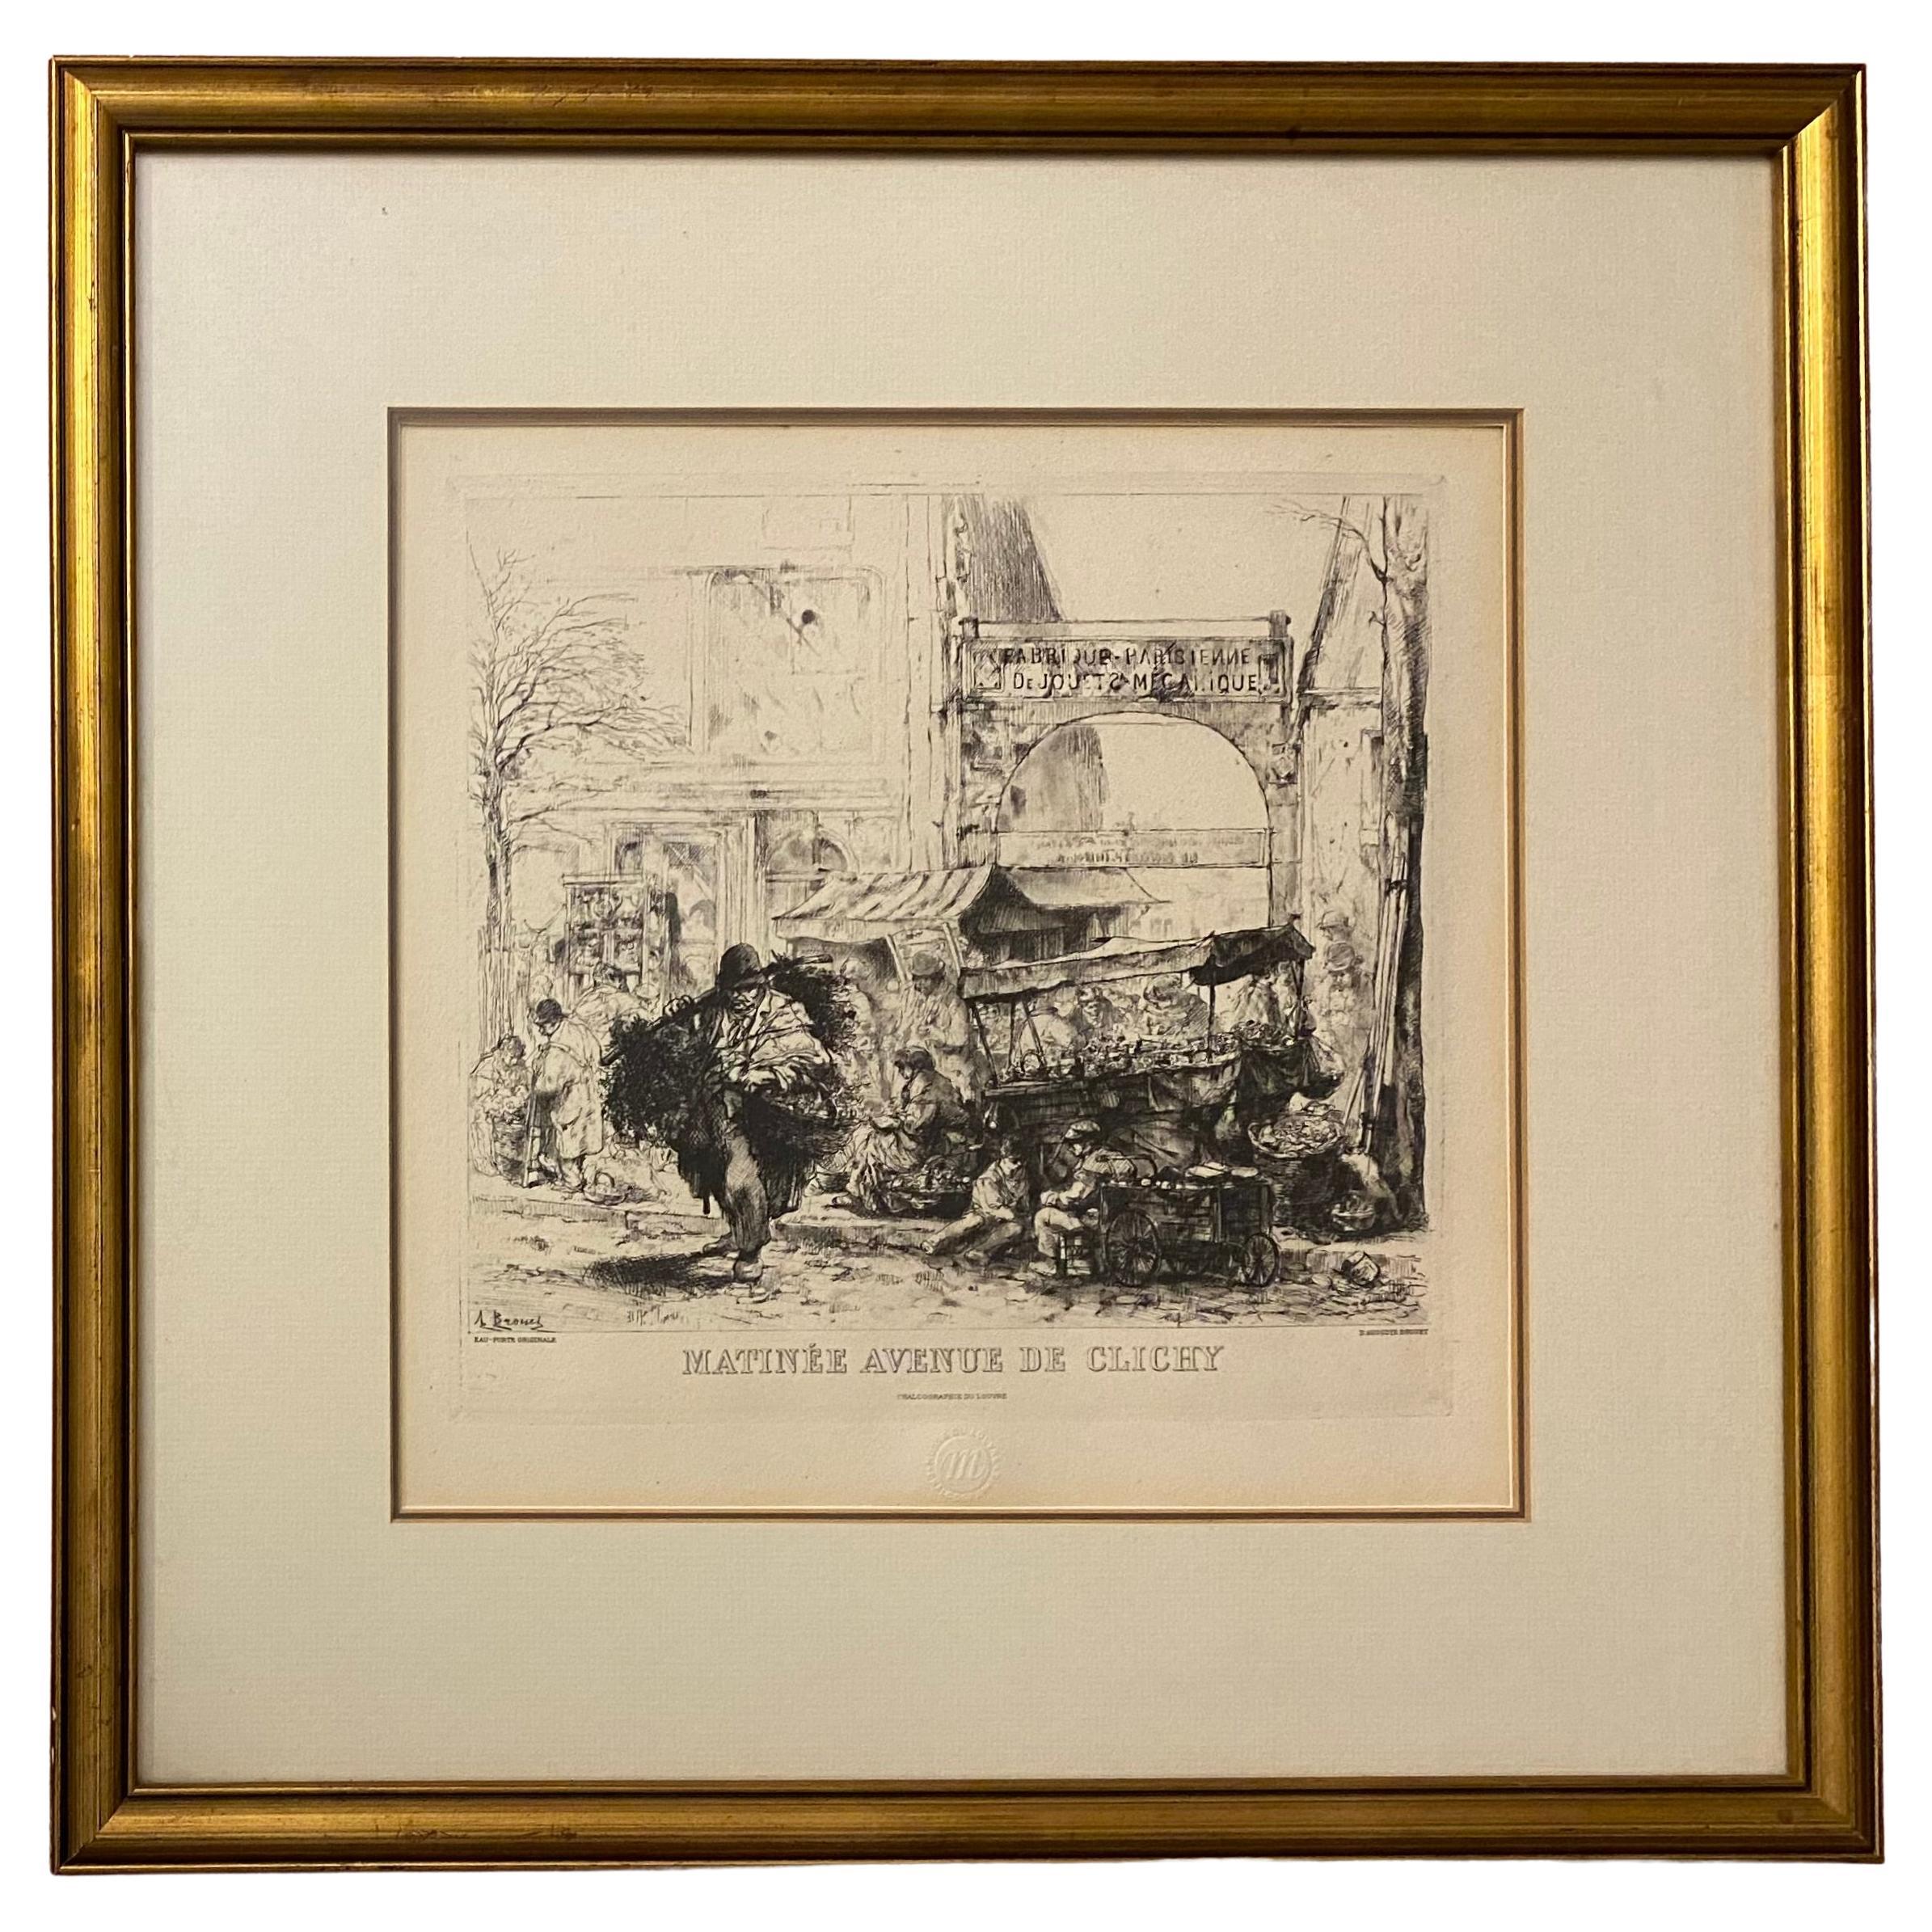 Chalcographie Engraving Issued By The Louvre "Matinee Avenue de Clichy" Framed For Sale